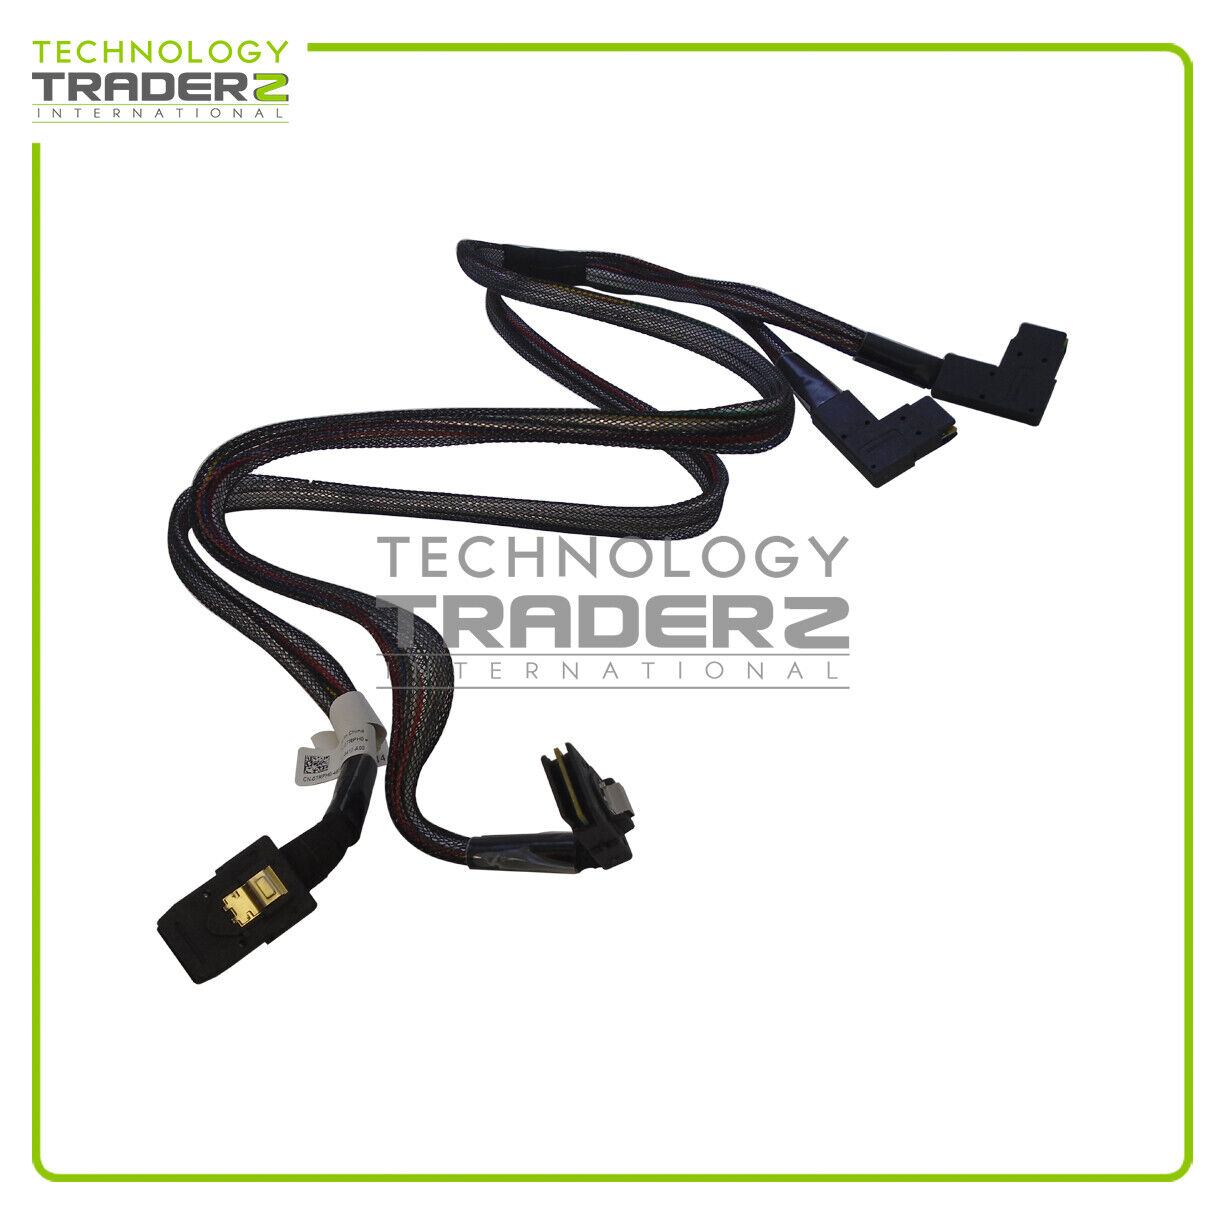 TRPH0 Dell PowerEdge R820 Dual Mini SAS Cable 0TRPH0 ***Pulled***